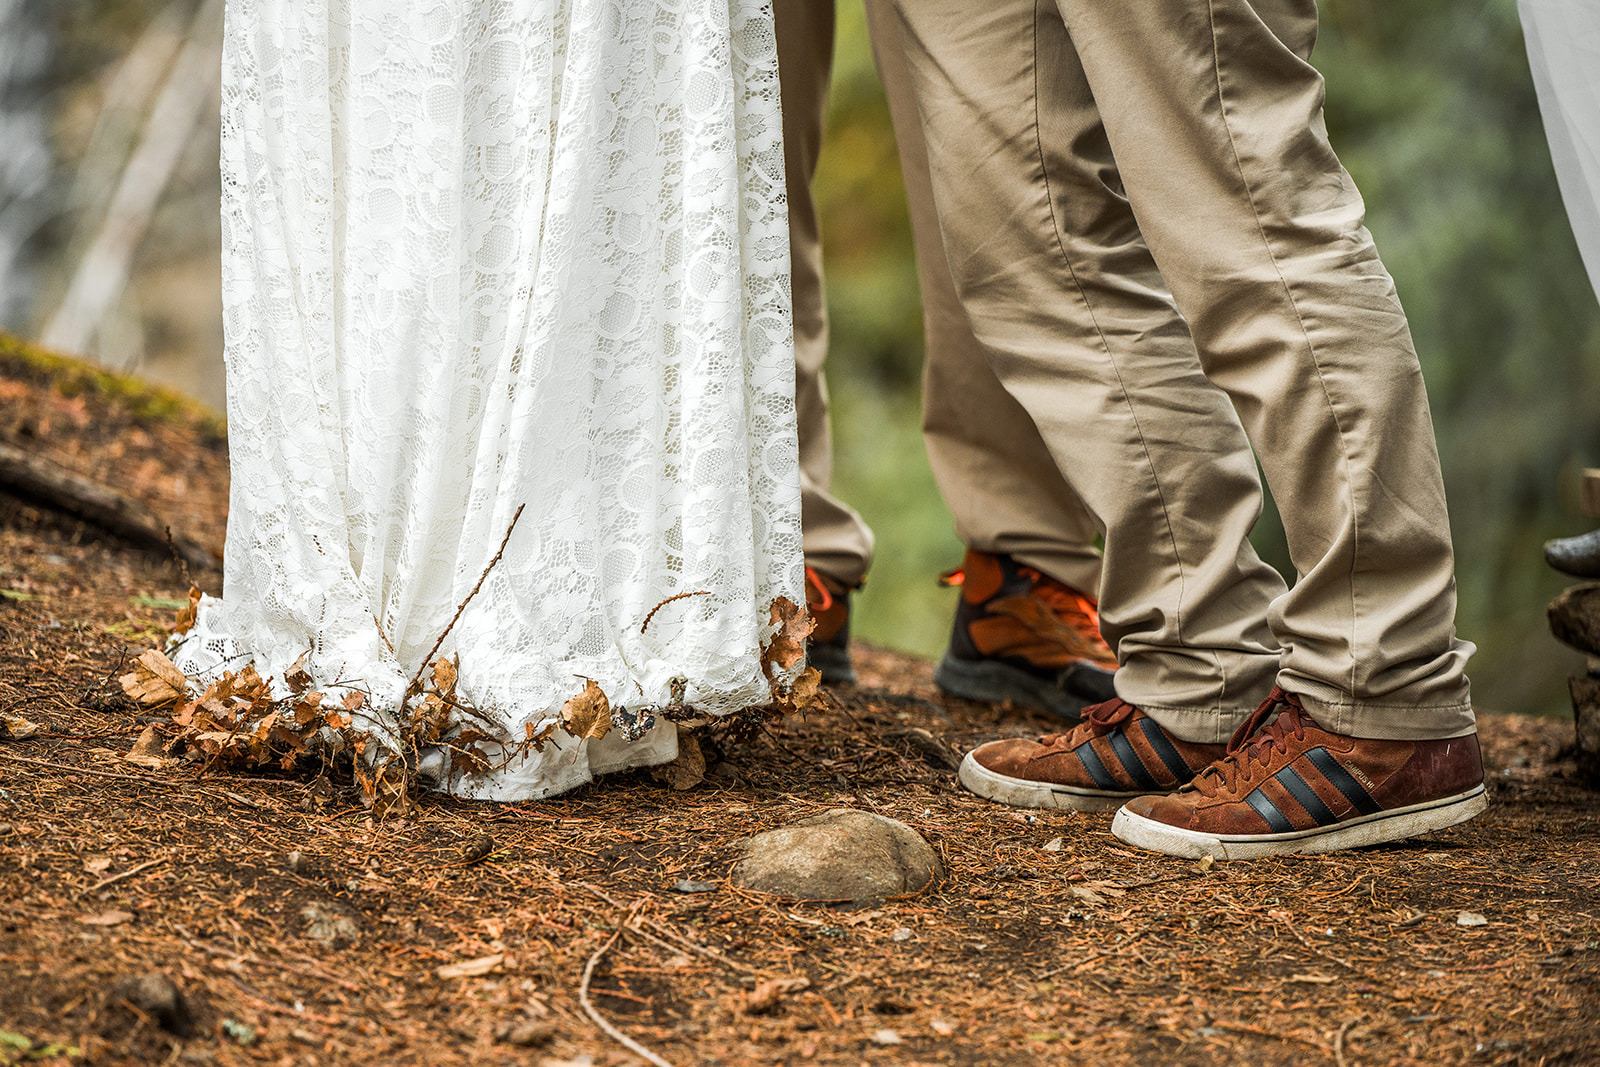 a closeup of the groom's shoes and the hem of the bride's dress, thickly matted with debris from the forest floor